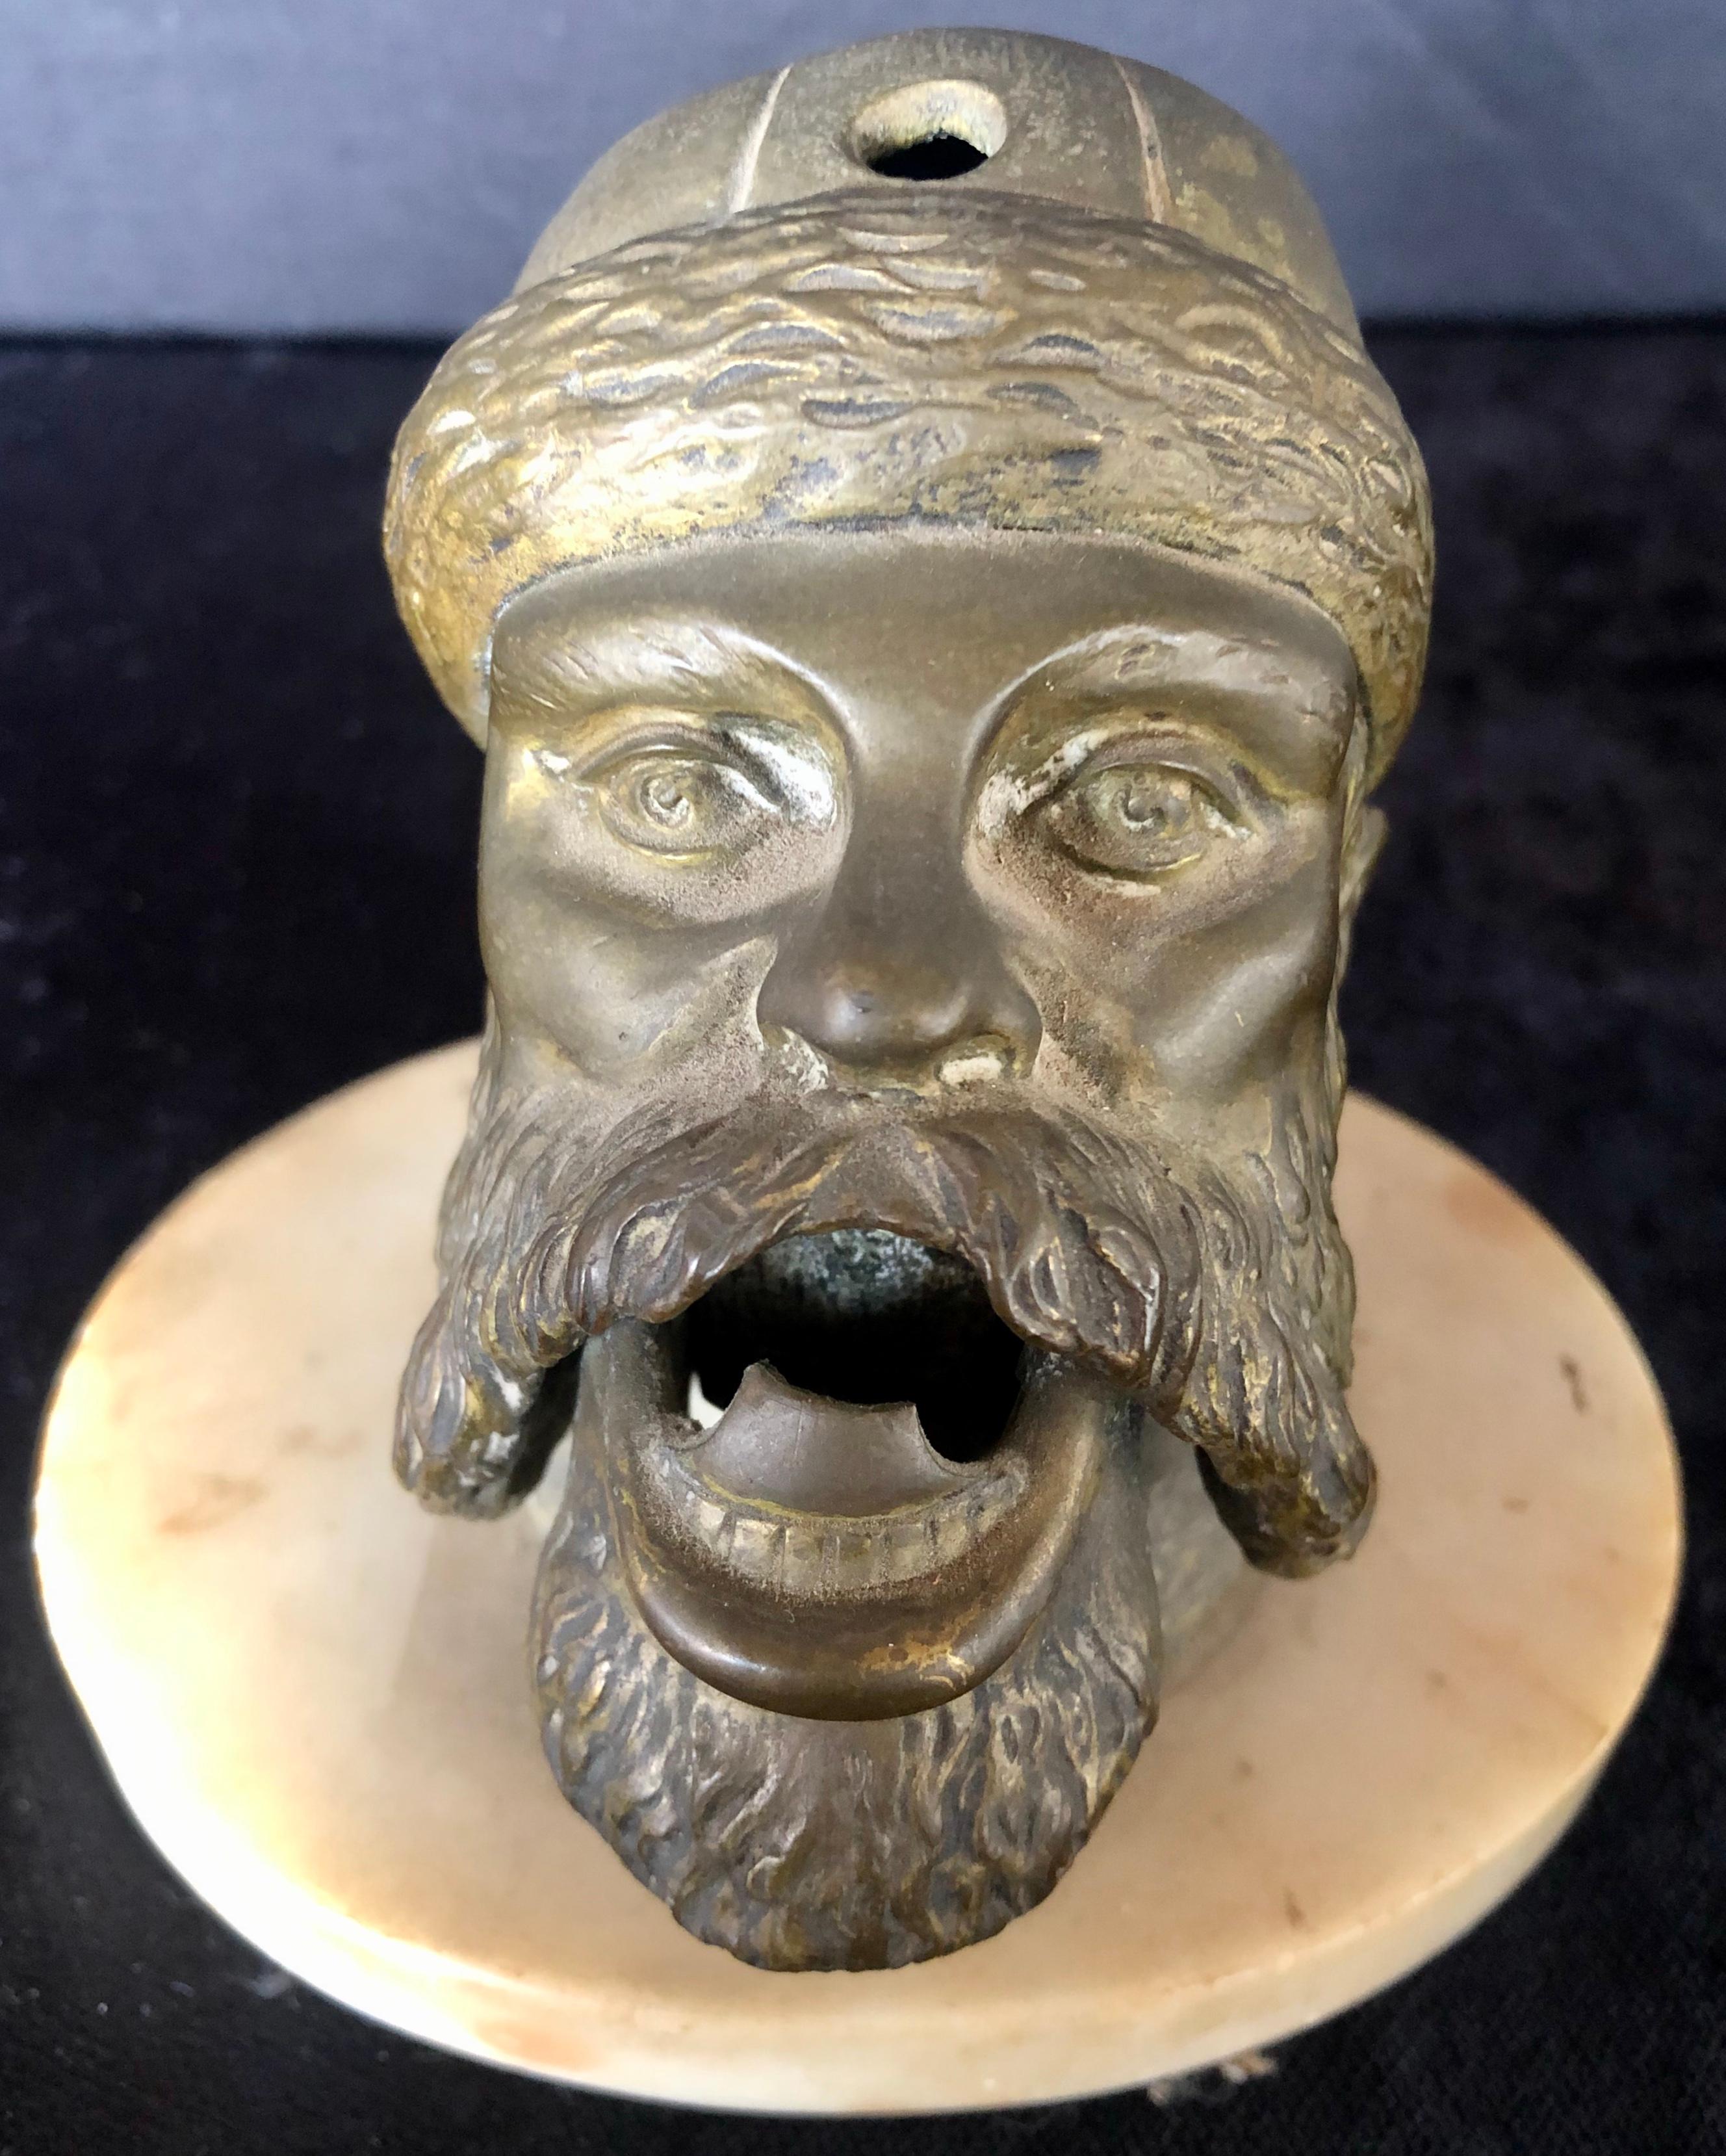 Bronze sculpture head cigar cutter on marble base a must have for any man cave or cigar room.
This is part of the personal collection purchased directly, From the estate of Jerry Terranova, Author of 